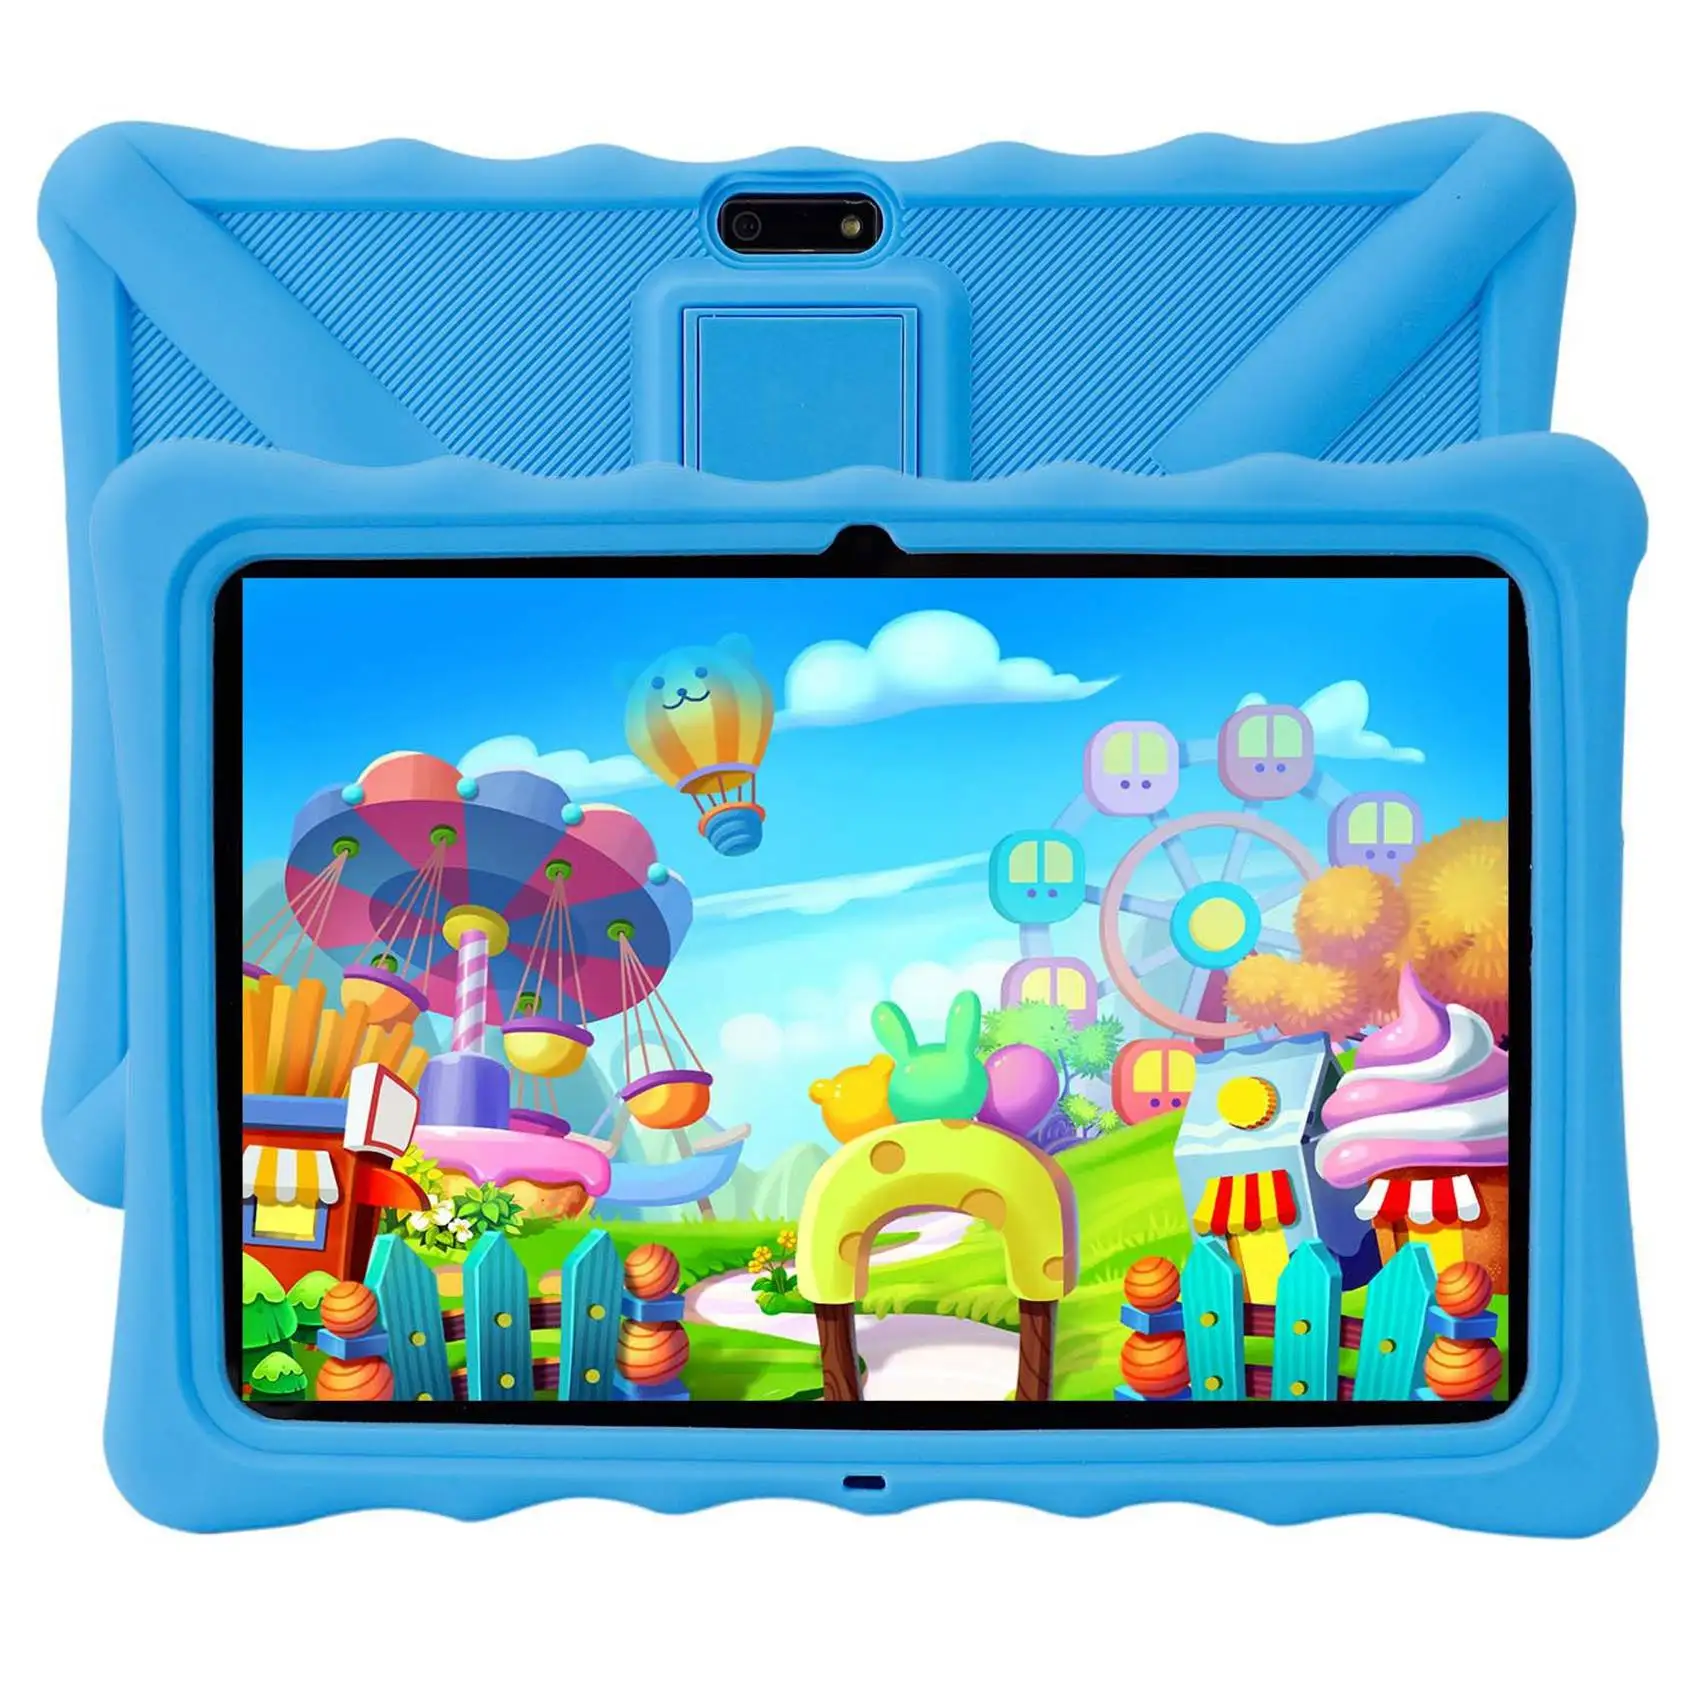 

10.1 Inch Children's Tablet PC 2GB+32GB Quad Core Android 10.0 Tablet PC Kids Learning Tutoring Machine Blue EU Plug